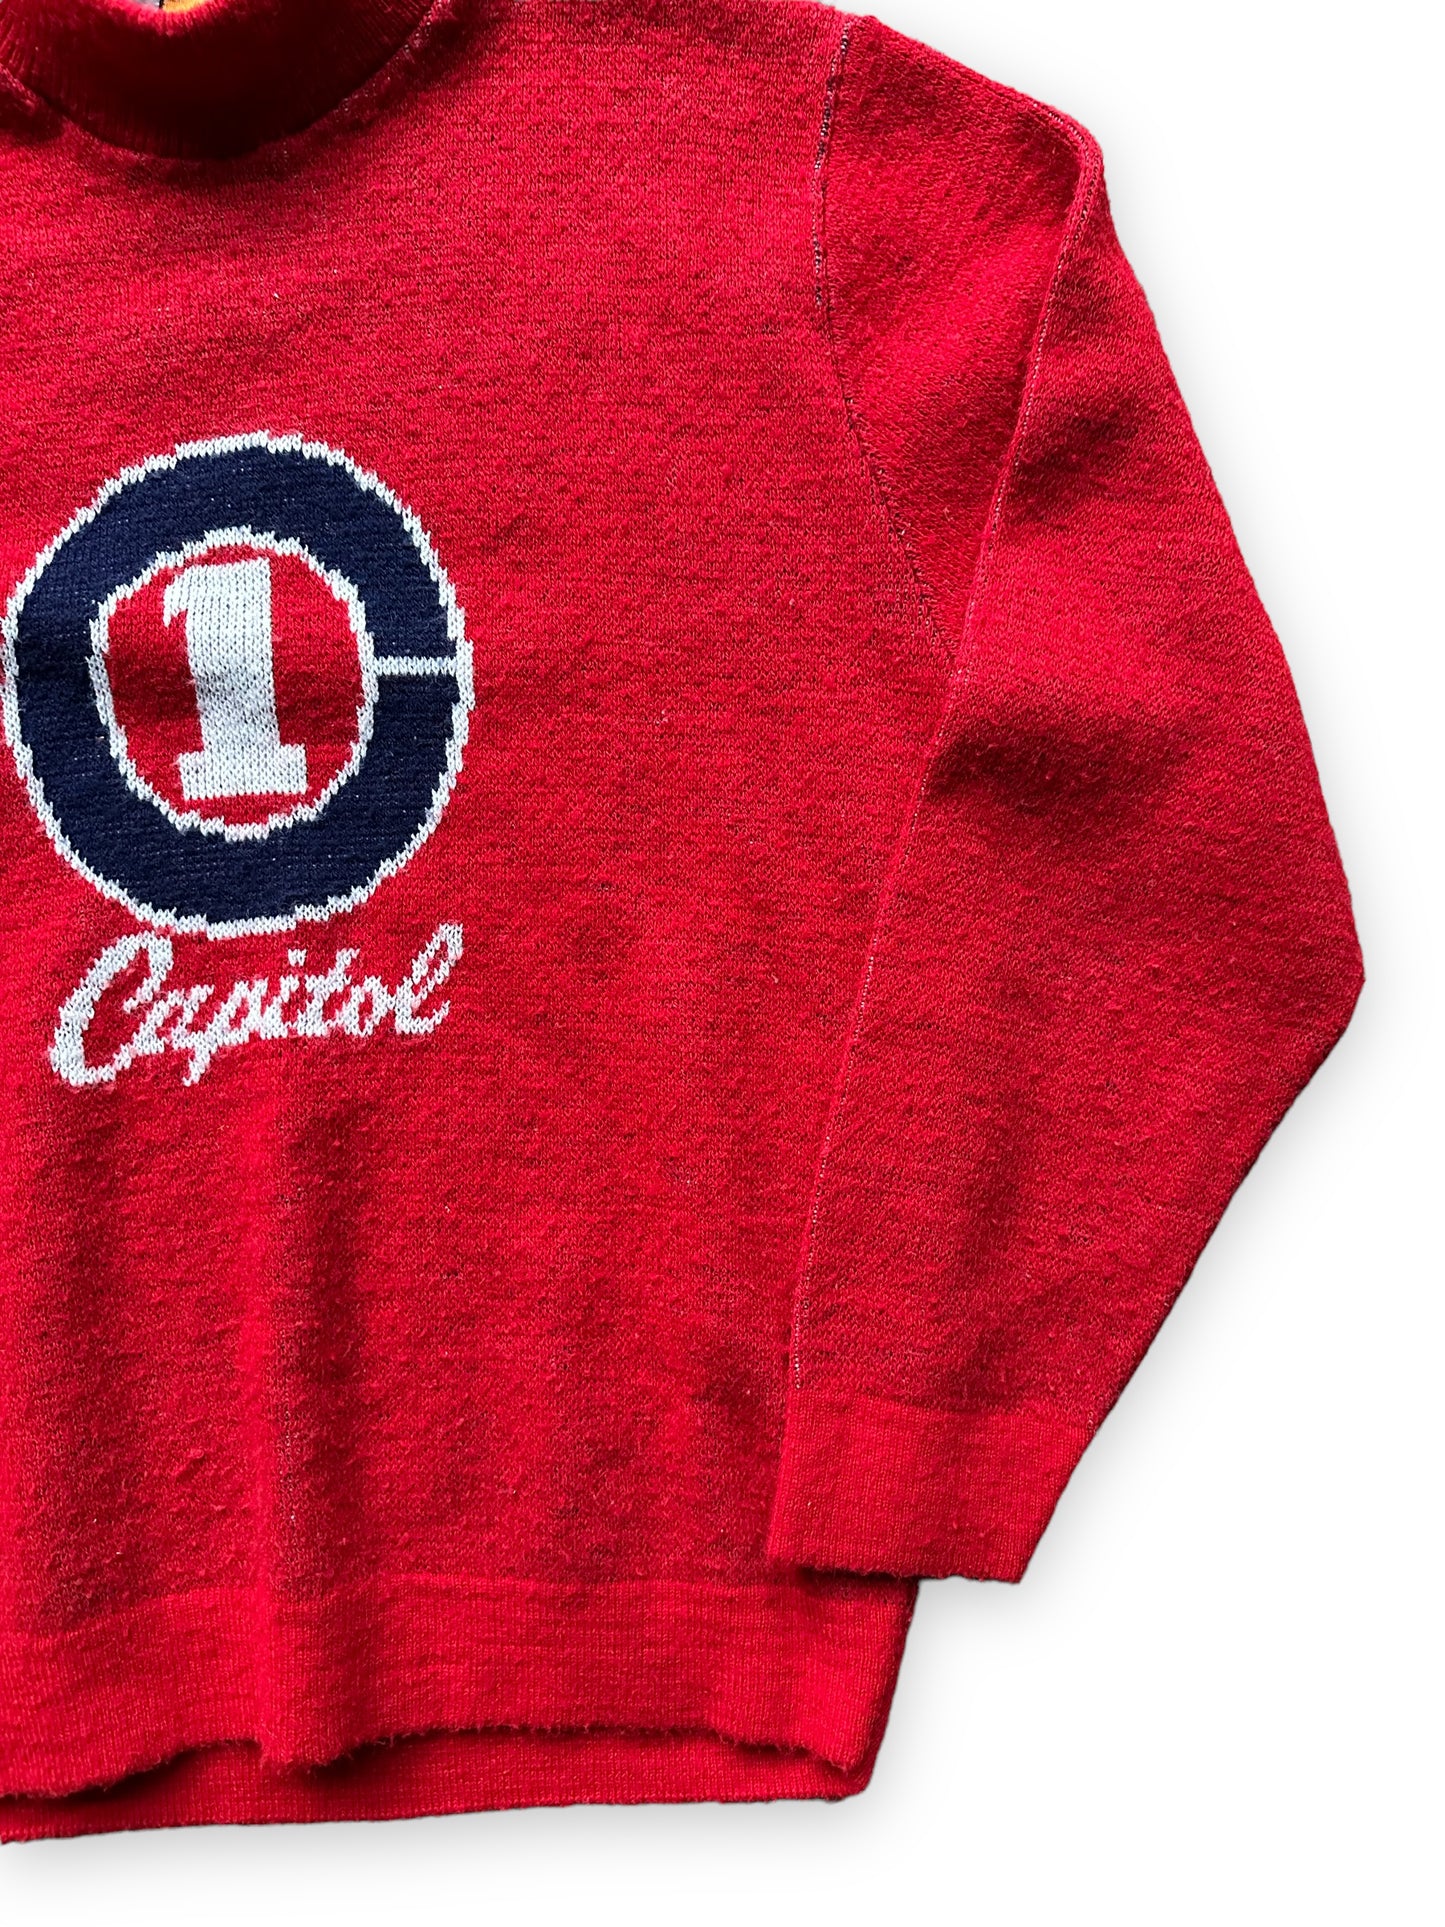 Front Left View of Vintage Capitol Records Promotional Sweater SZ M |  Vintage Sweaters Seattle | Barn Owl Vintage Seattle